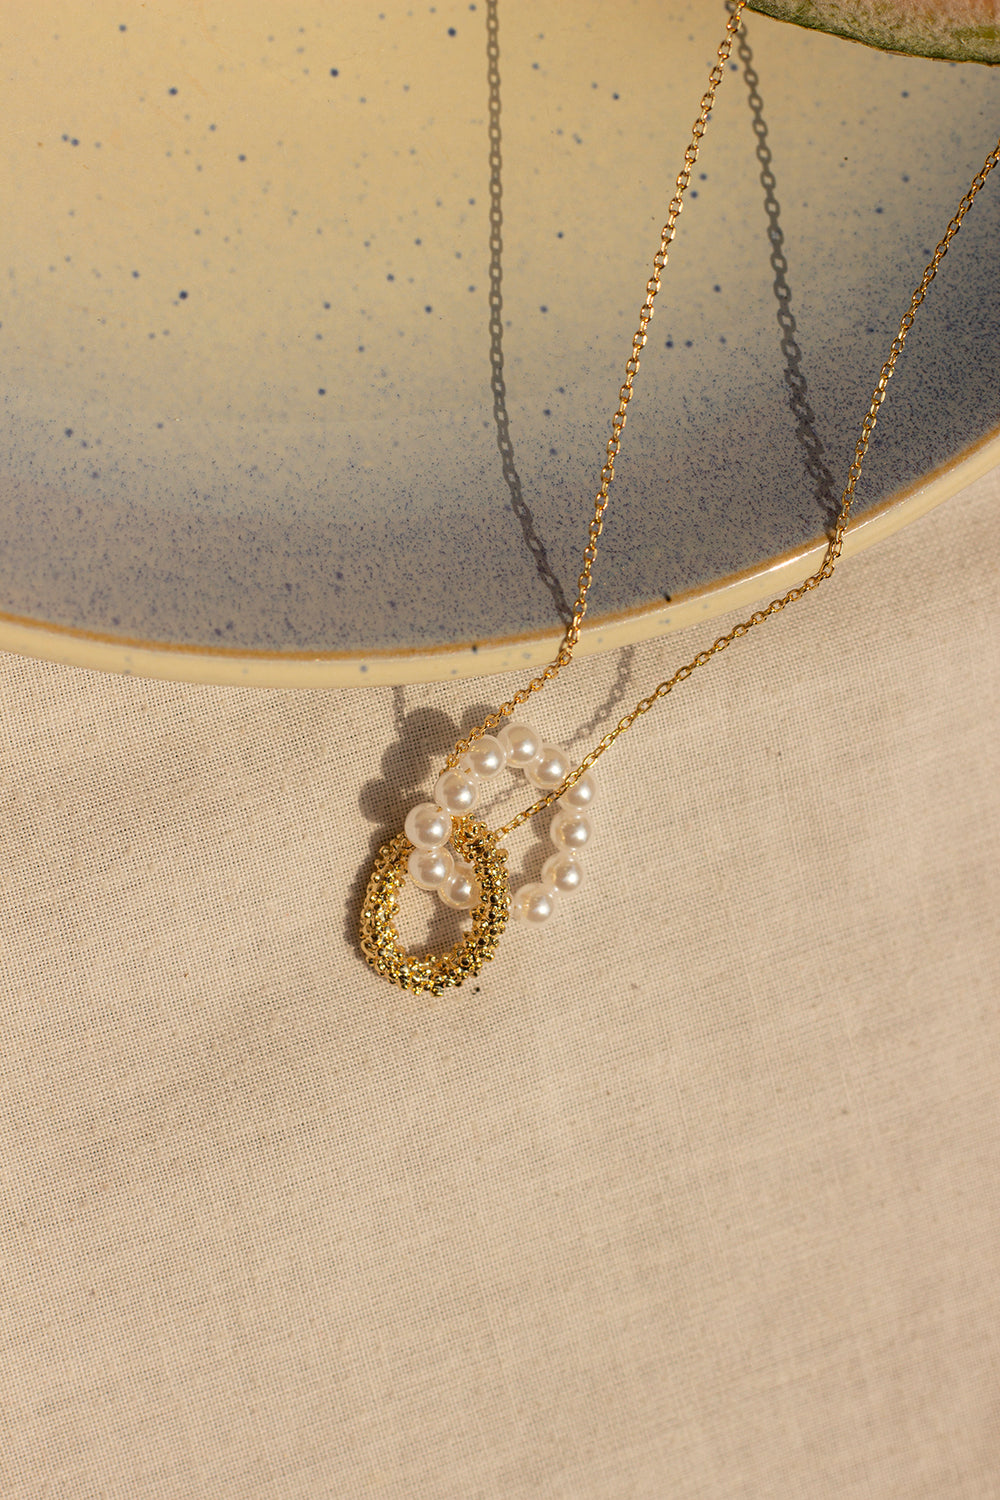 Interlinked Pearl and Gold Circle Pendant Necklace - Sugar + Style